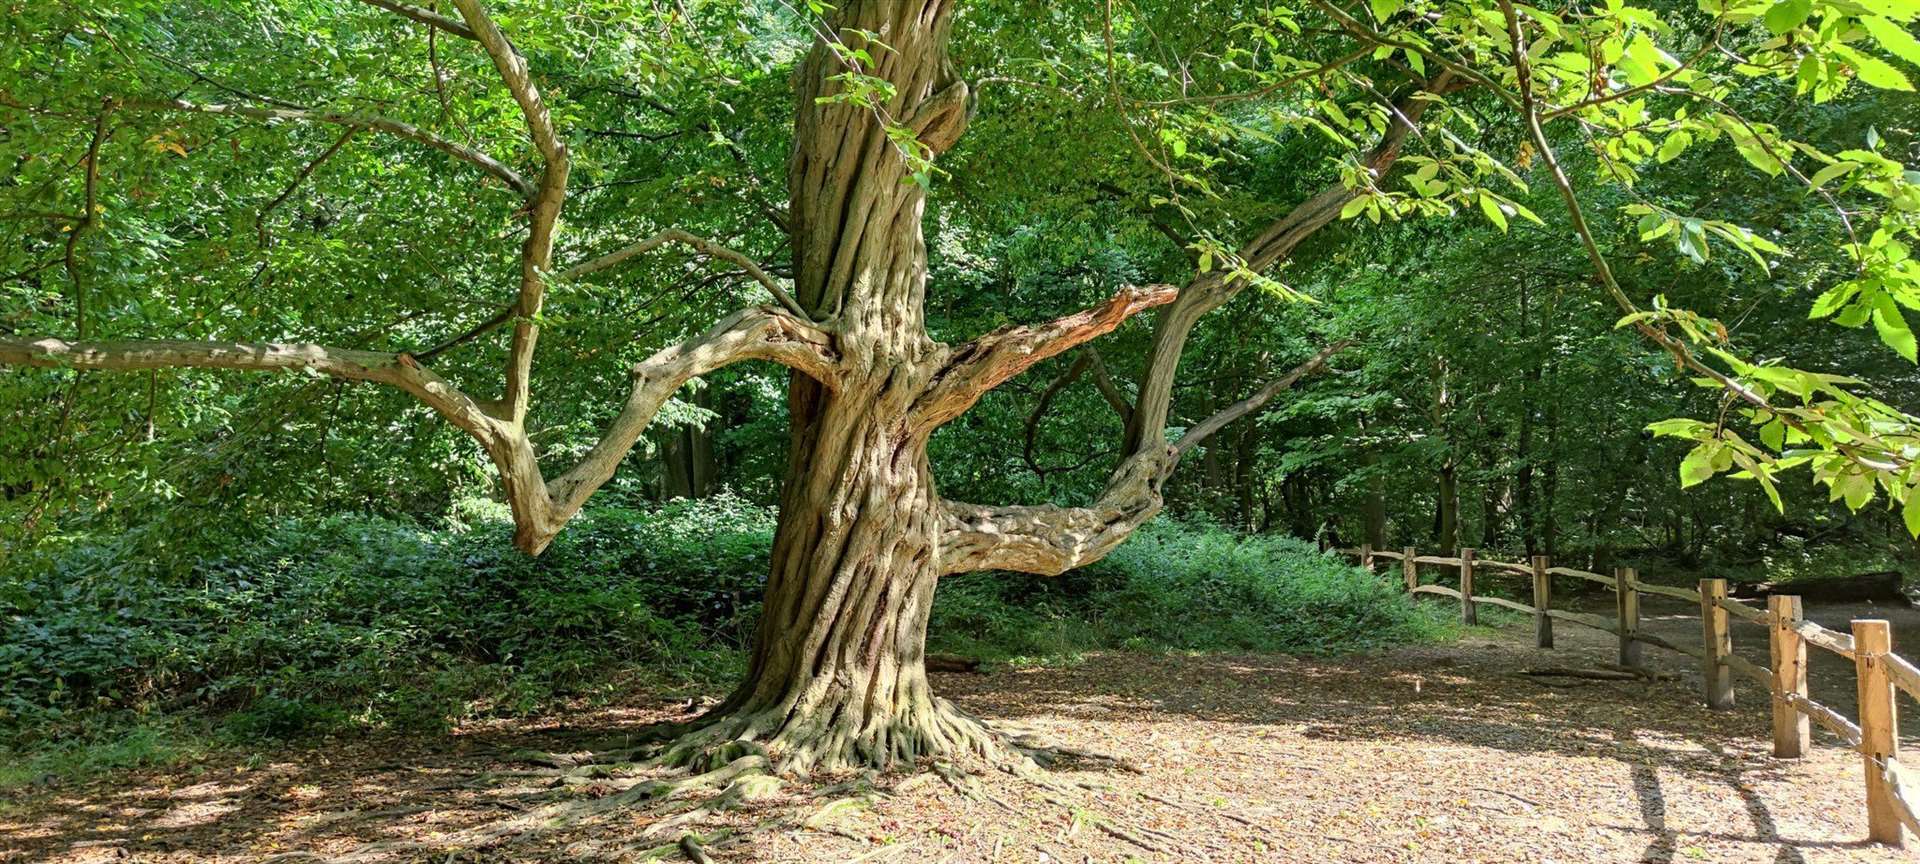 The Teapot Tree in Ashenbank Wood made the final shortlist Pic: The Woodland Trust